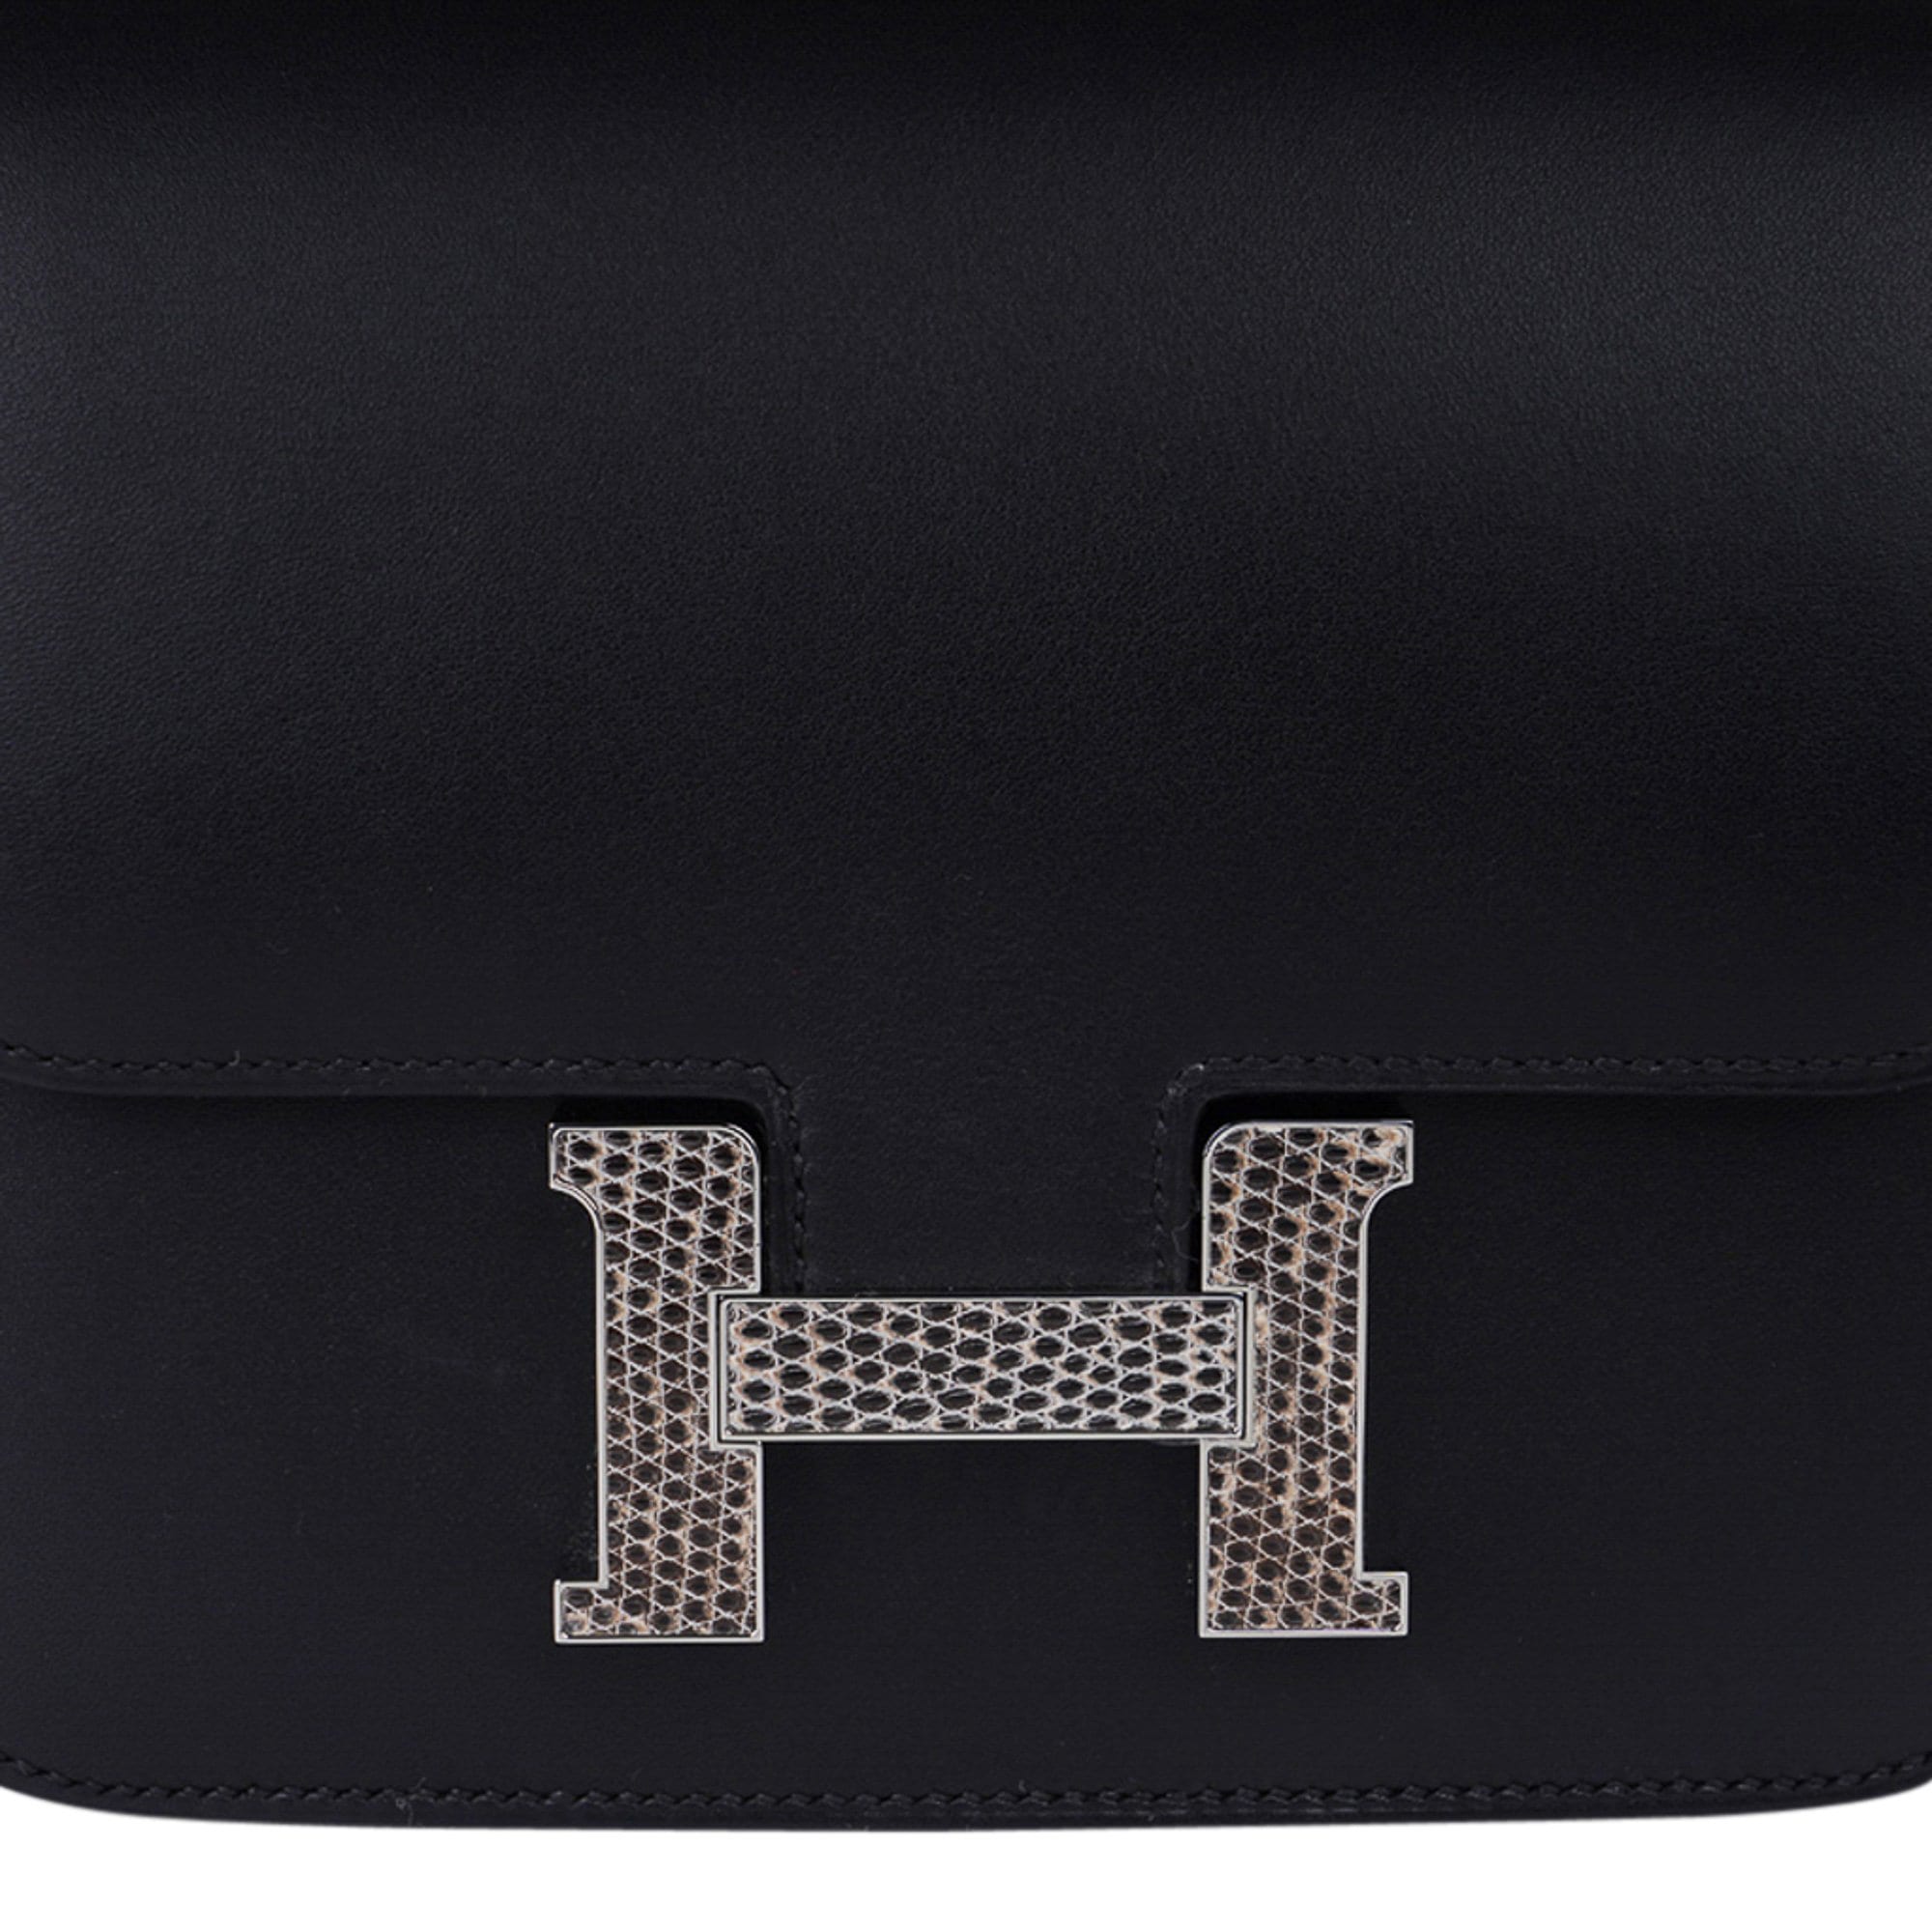 Hermes Constance Bag 18 Black / Ombre Lizard Buckle Madame Leather New